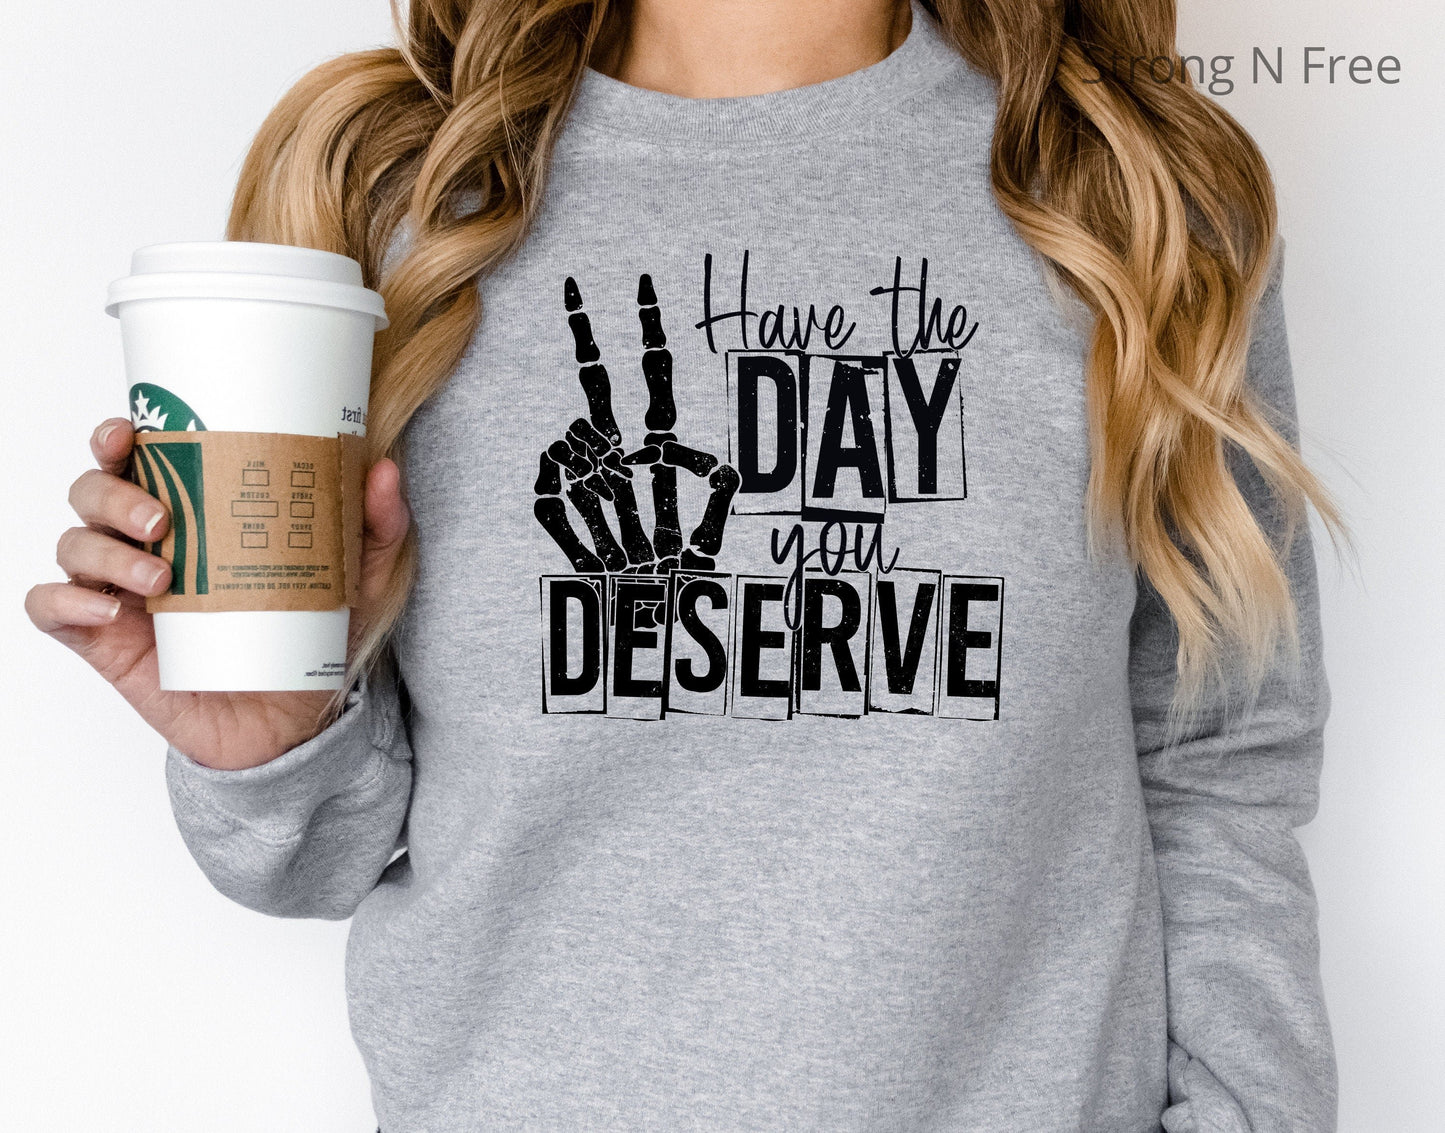 Have the day you deserve, women tee, funny women's sweatshirt, graphic tee, women's clothing, gift for her .